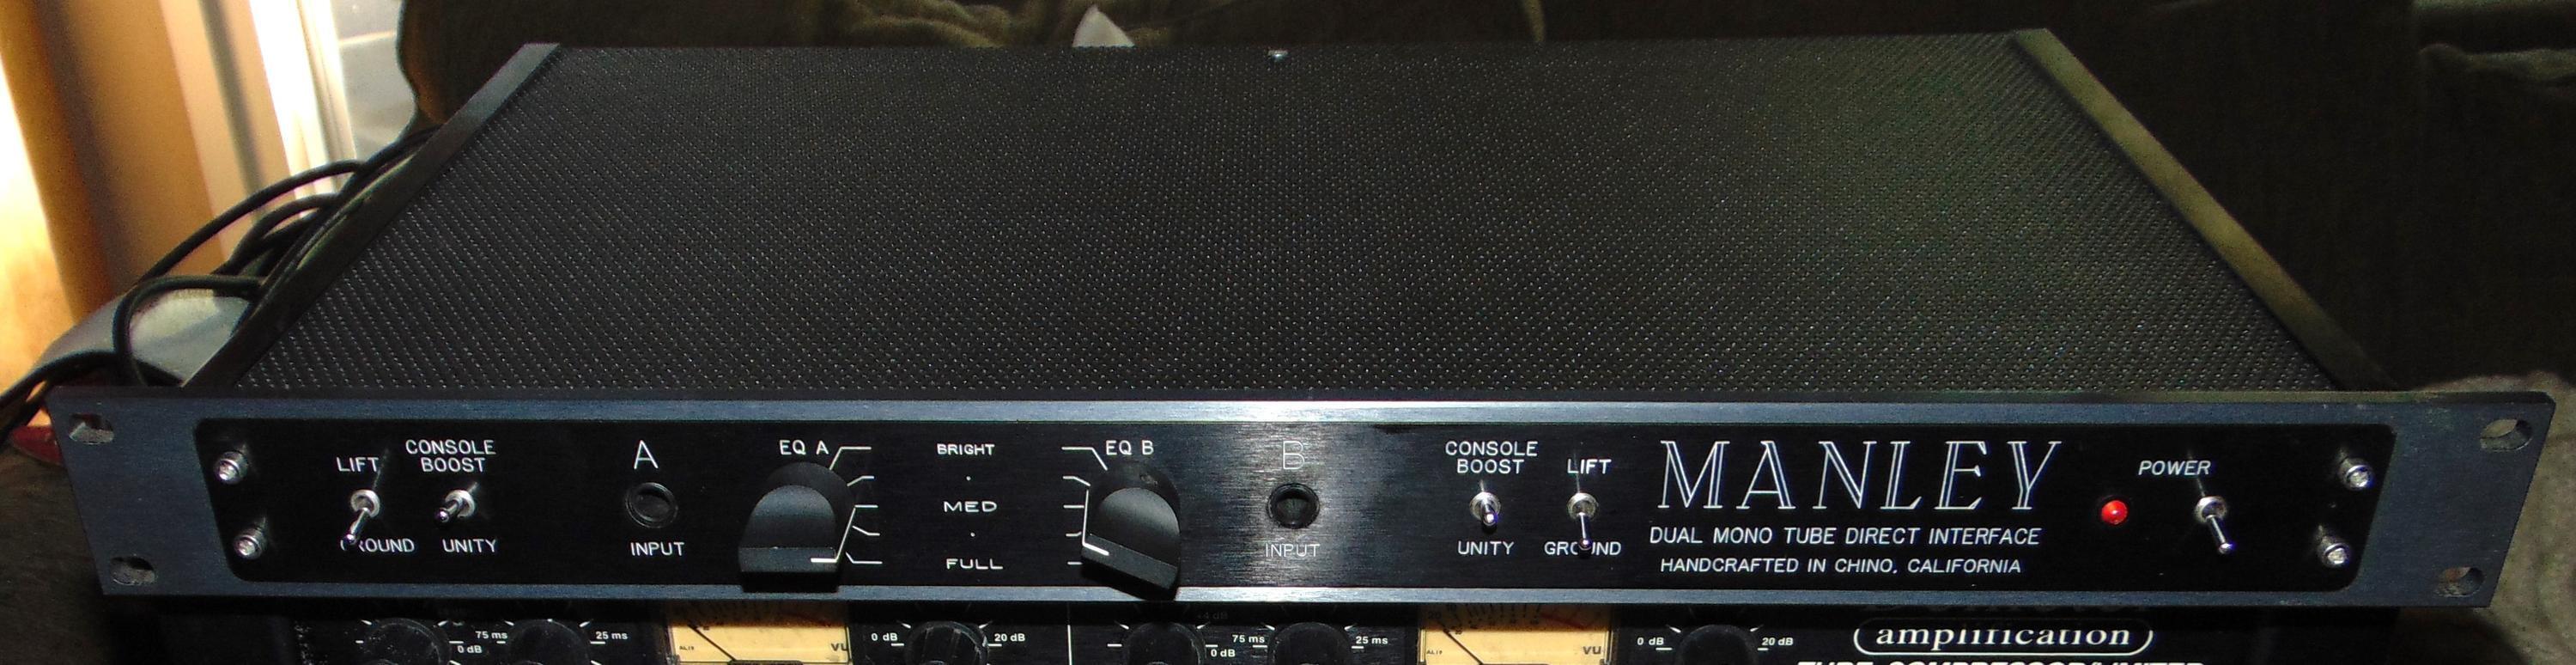 Used Manley Labs Manley Dual Mono Tube Direct Interface DI Box-Unit